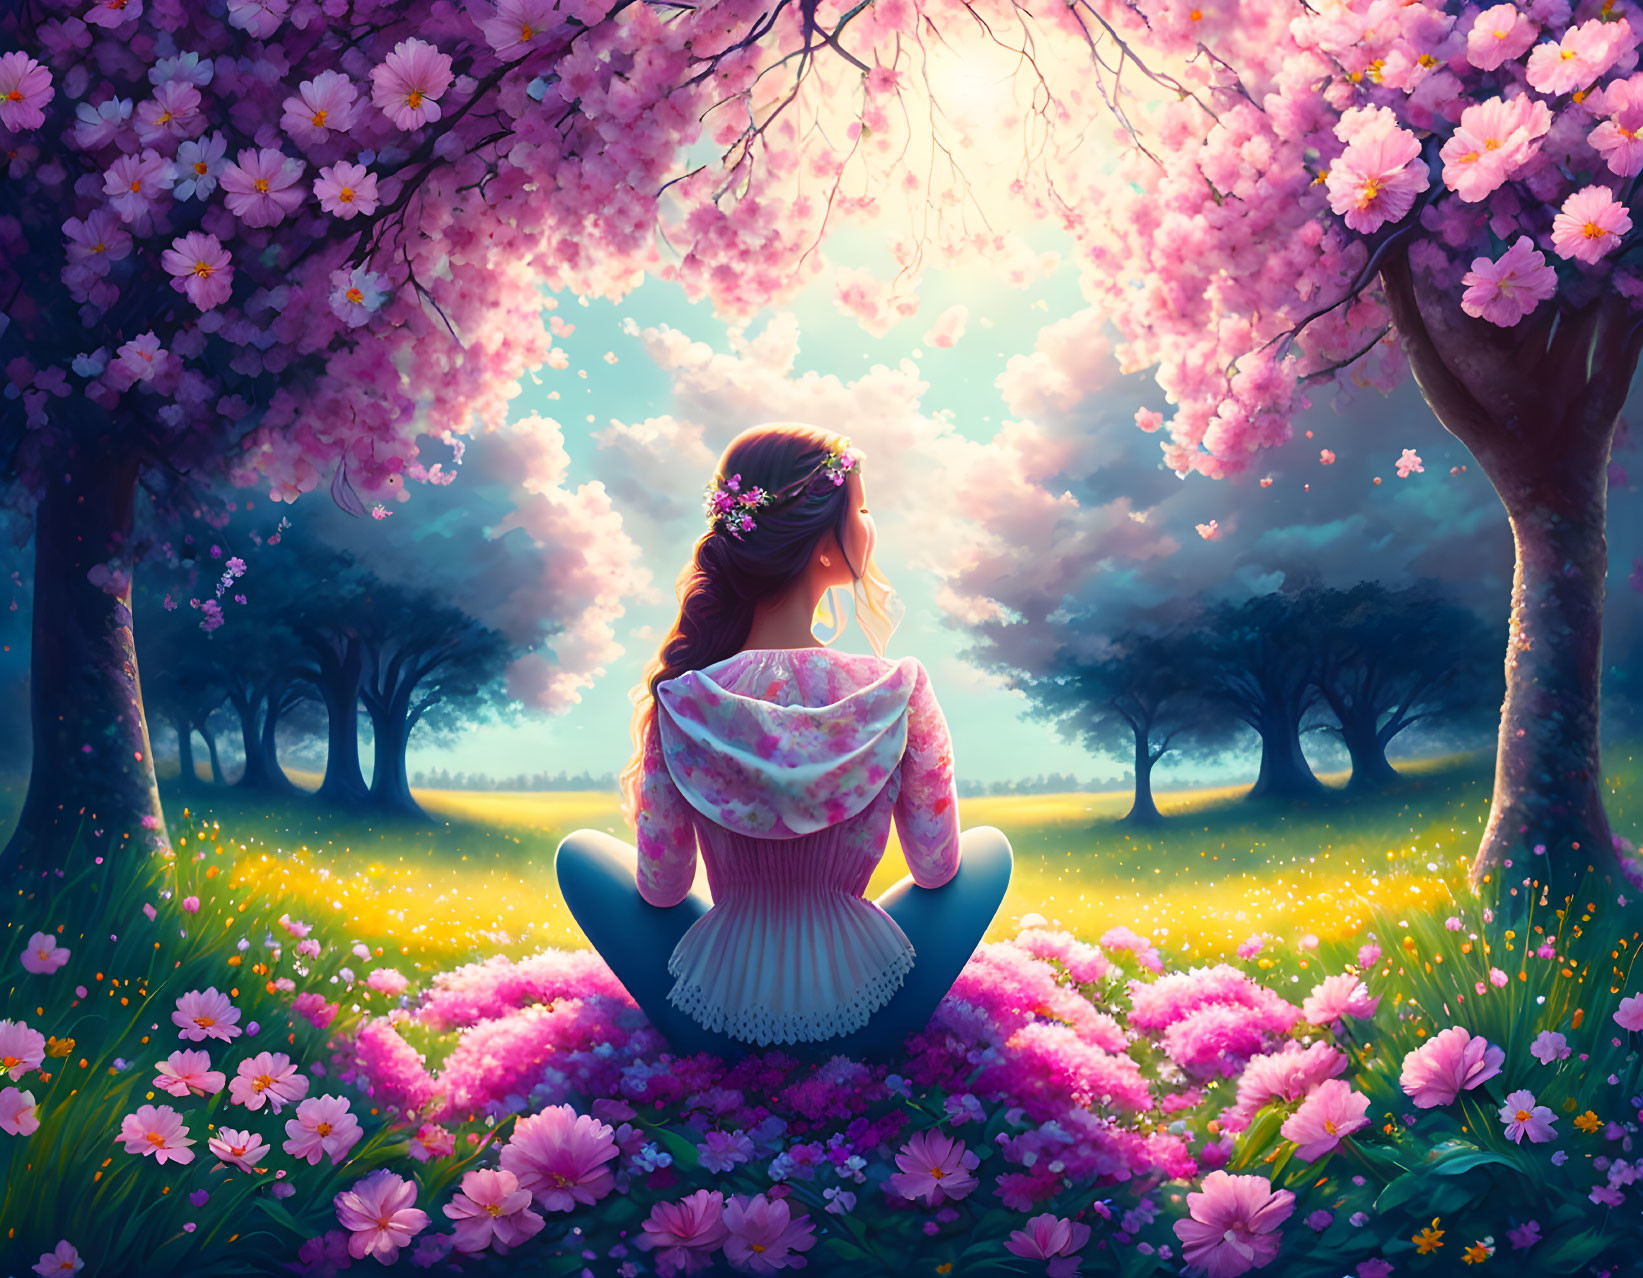 Woman sitting in vibrant field looking at pink flowering forest under dreamy sky